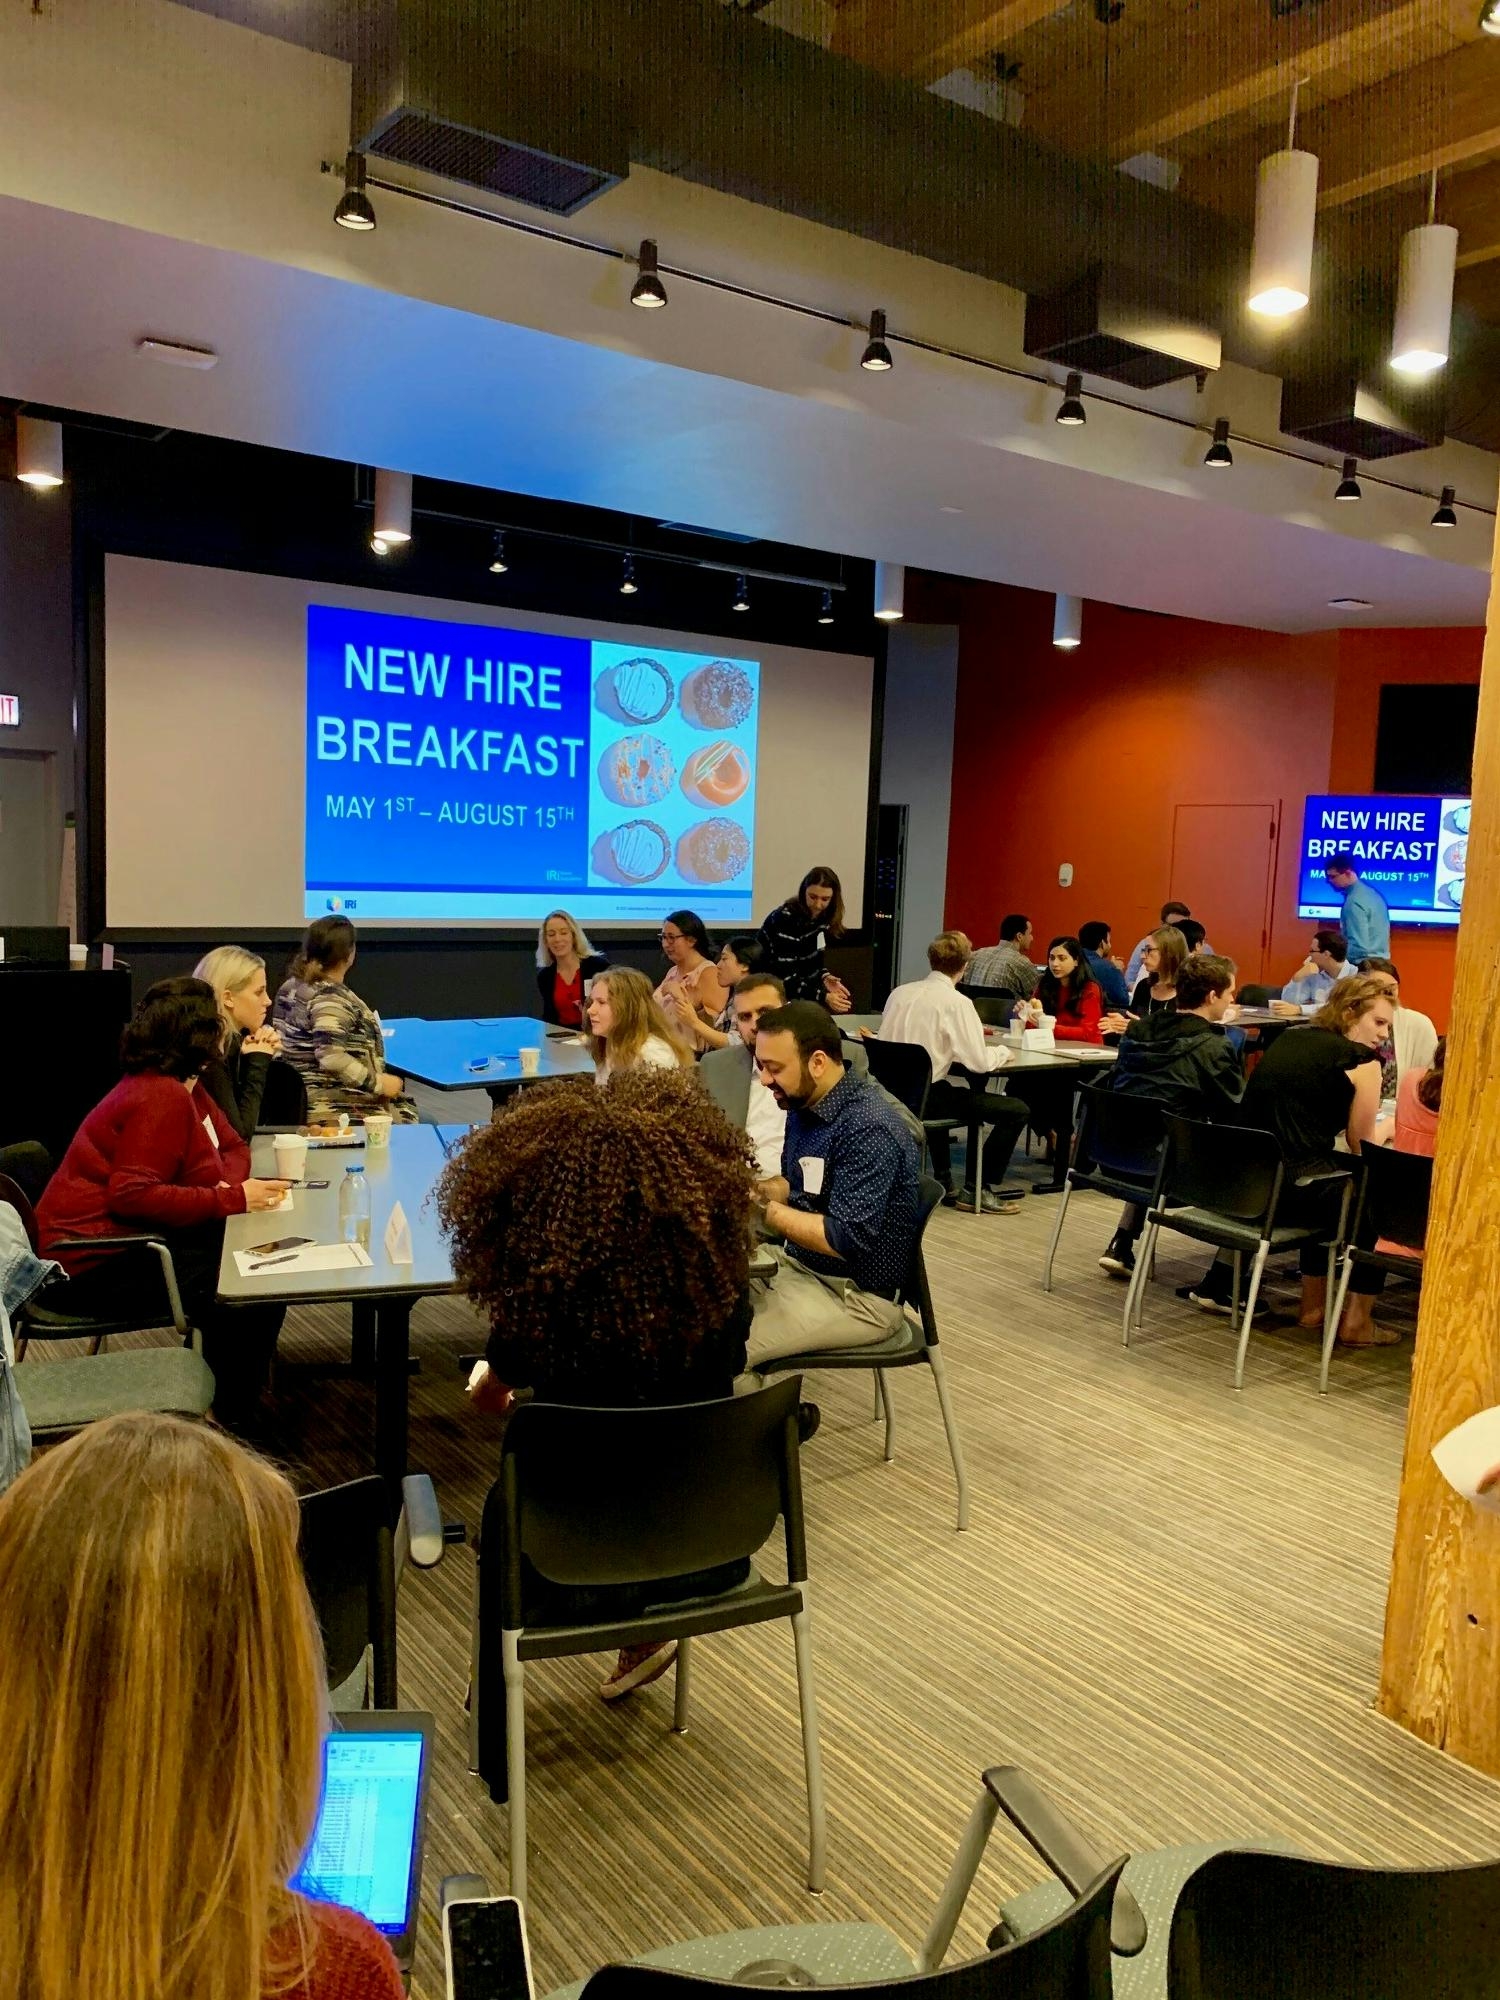 Welcoming our newest IRI team members at the new hire breakfast.